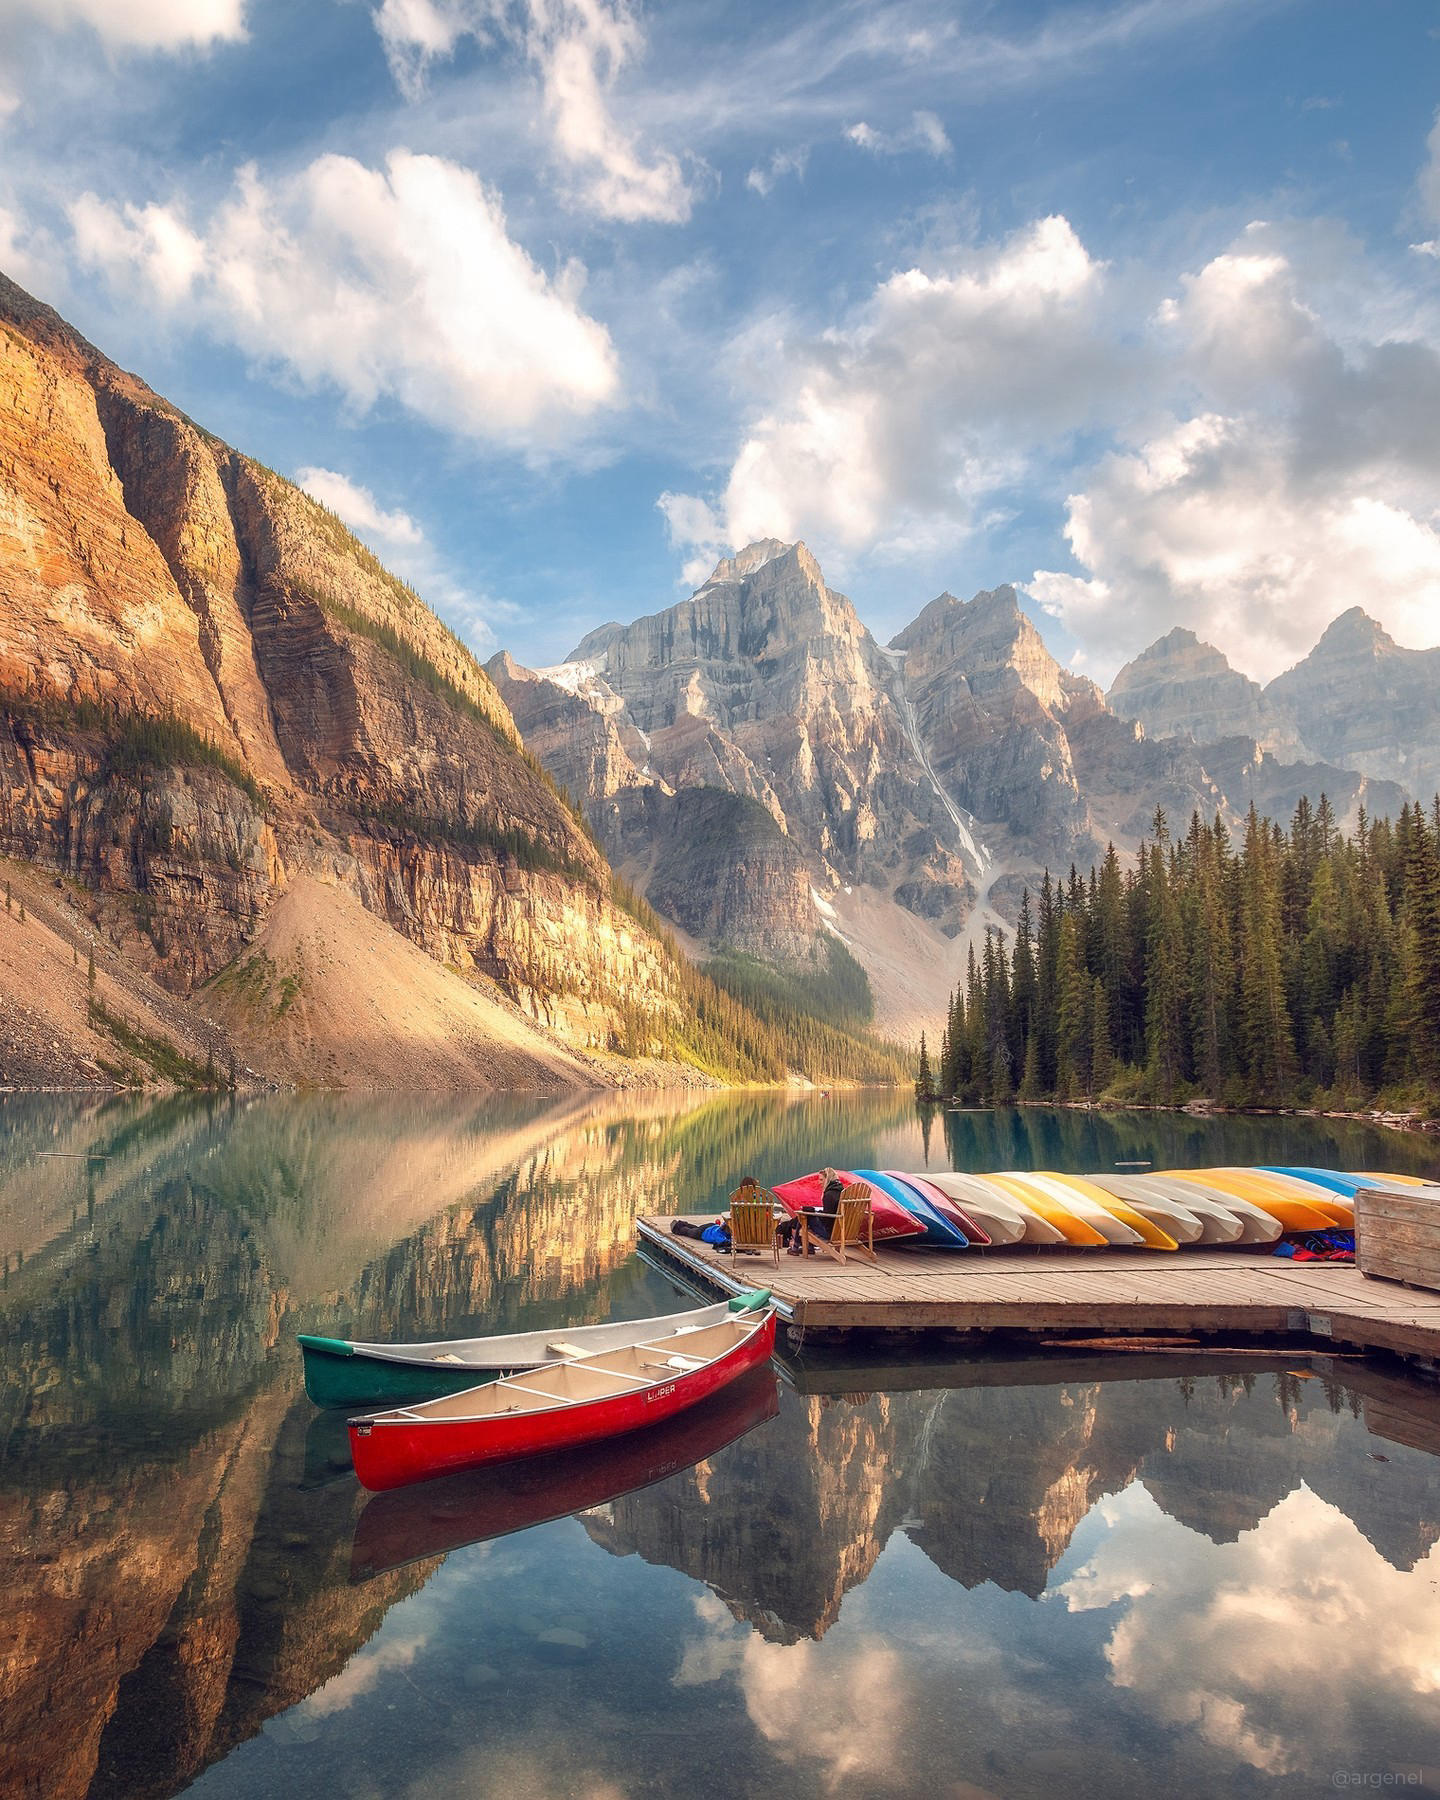 Passion Passport - Visit Moraine Lake, nestled in the striking Valley of the Ten Peaks, Once feature